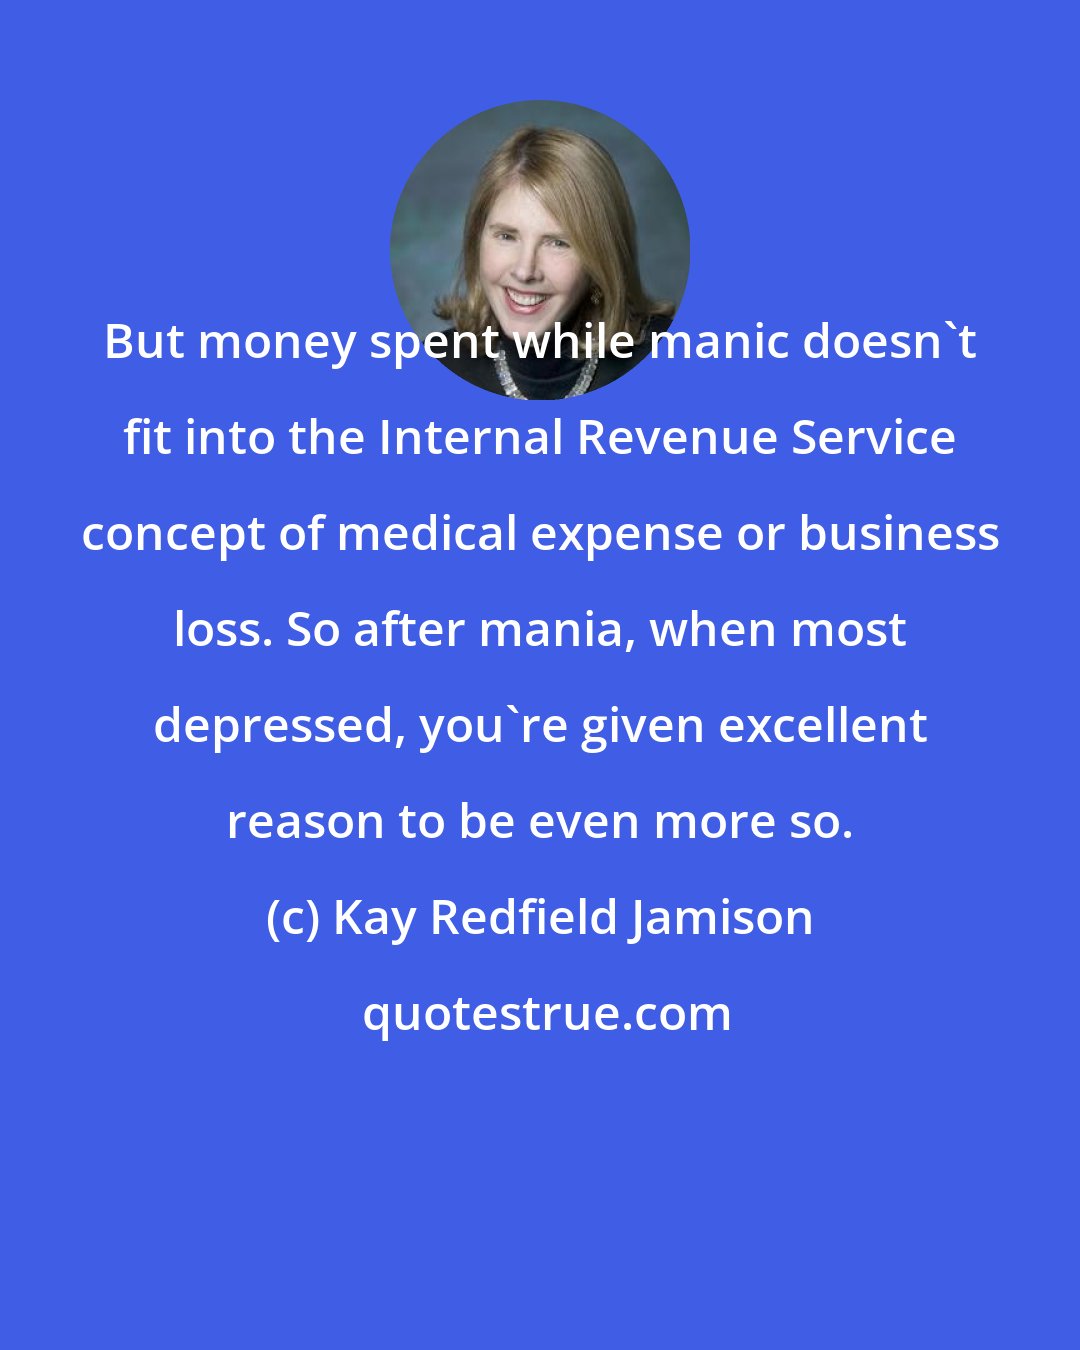 Kay Redfield Jamison: But money spent while manic doesn't fit into the Internal Revenue Service concept of medical expense or business loss. So after mania, when most depressed, you're given excellent reason to be even more so.